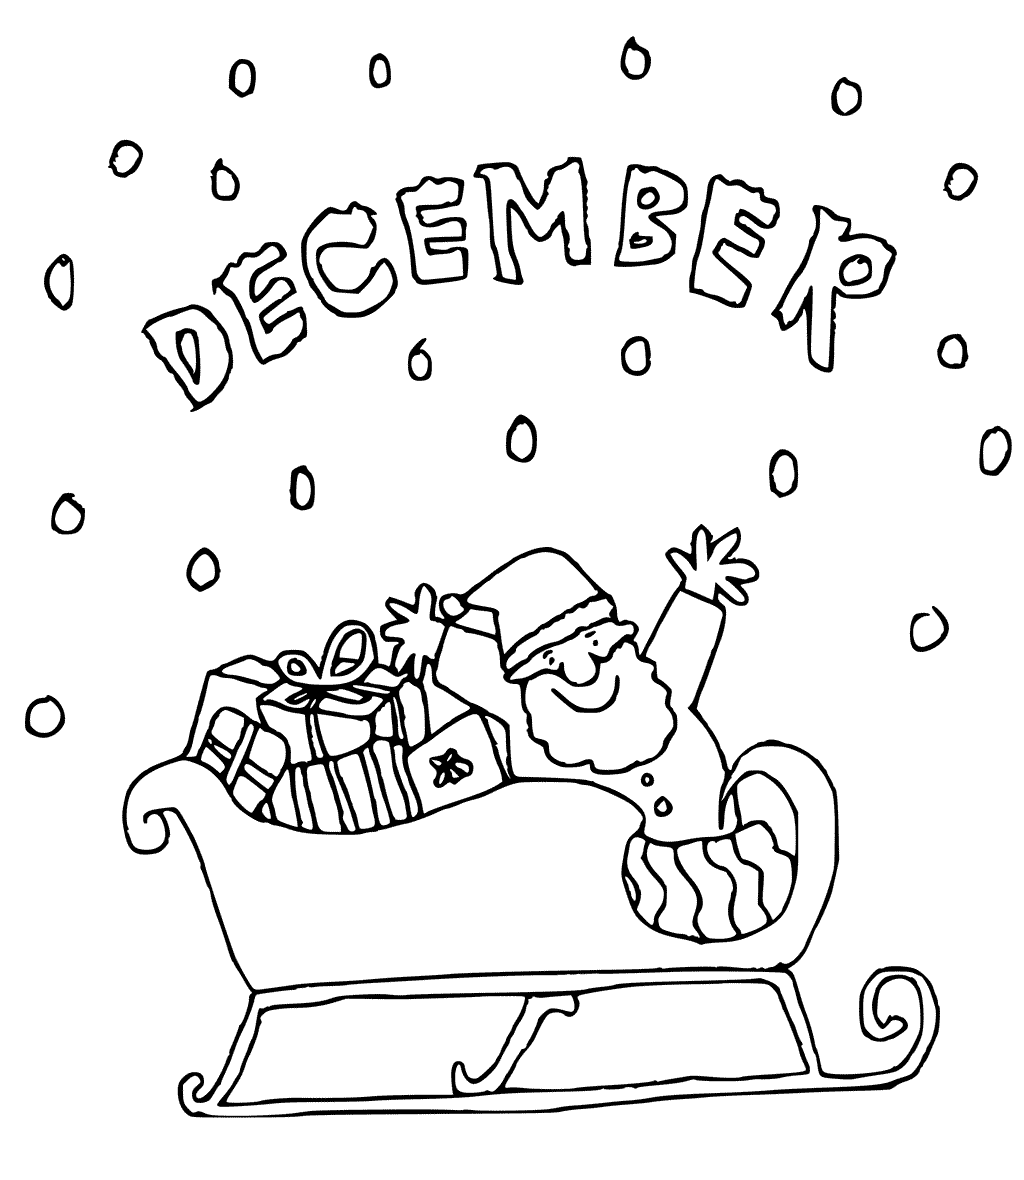 December With Santa Coloring Pages